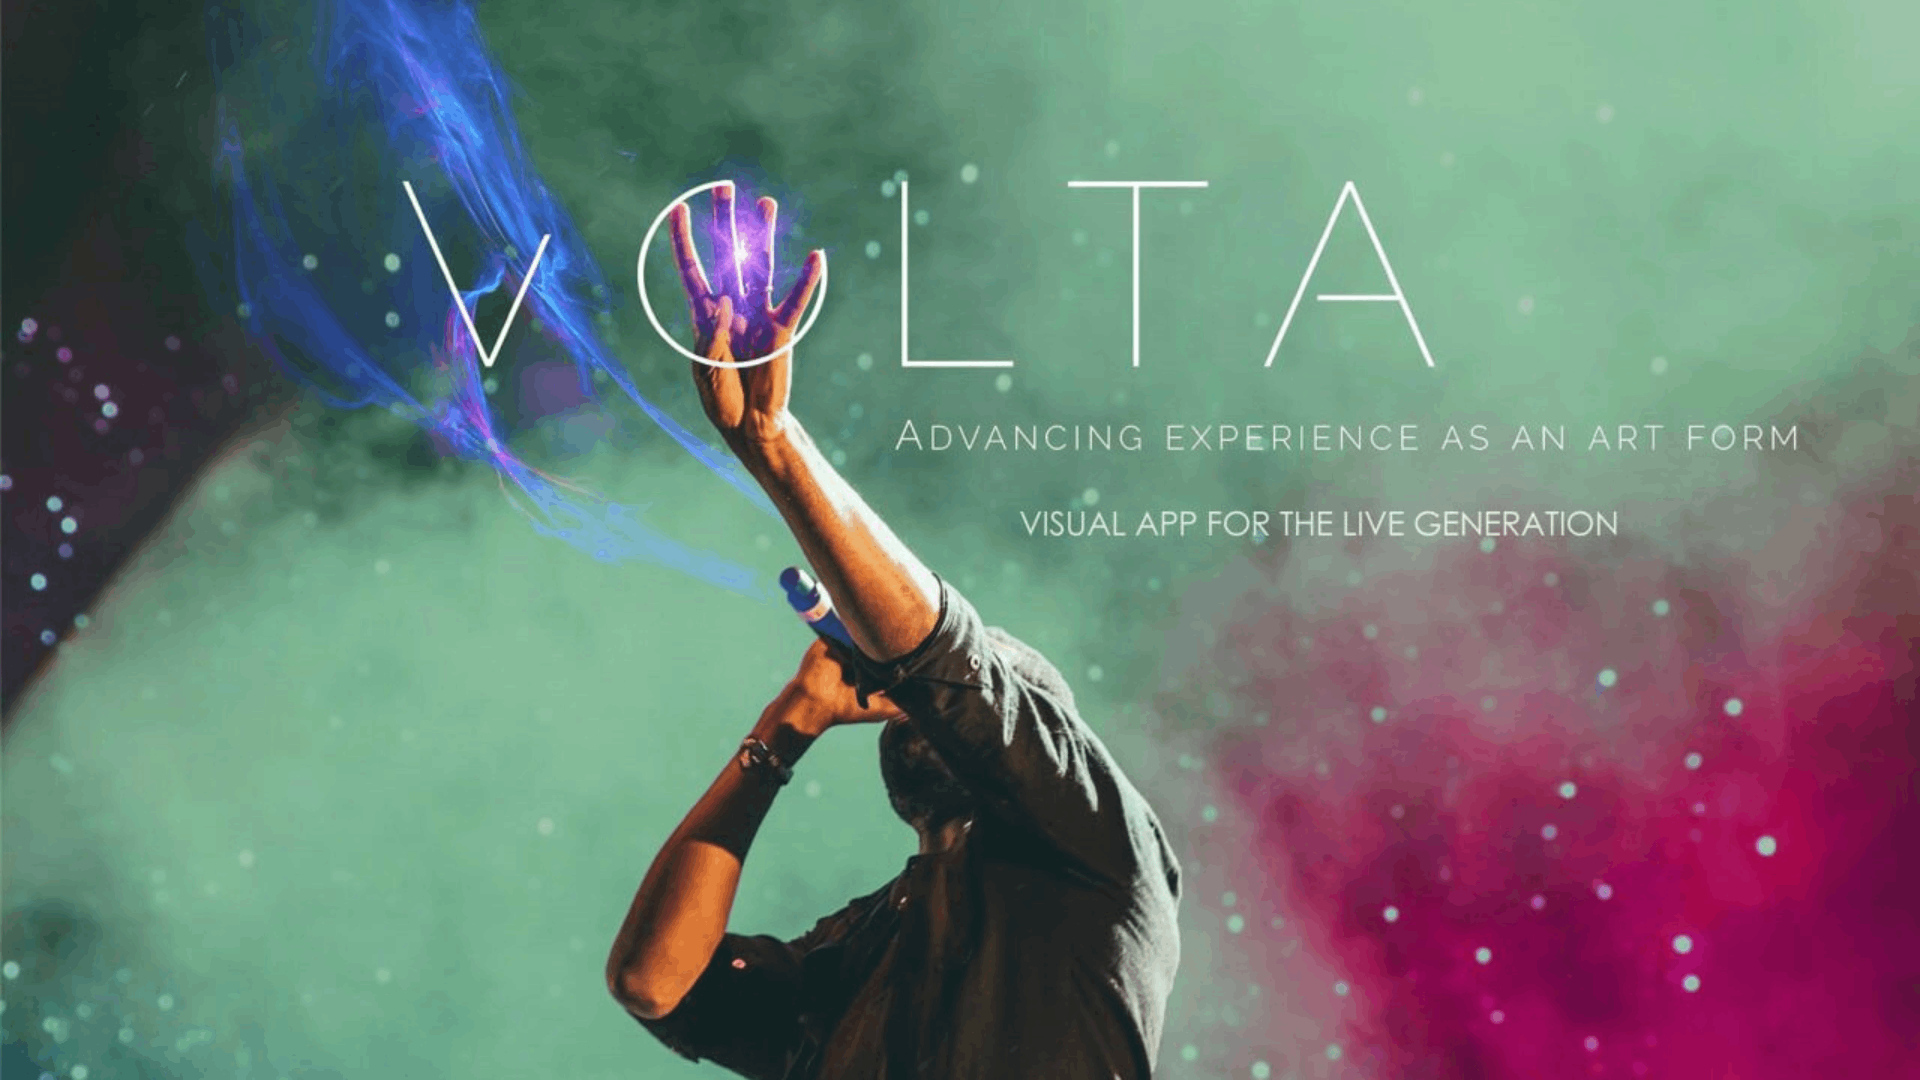 Volta Selected as a Top 100 Next Generation Company by World Future Awards